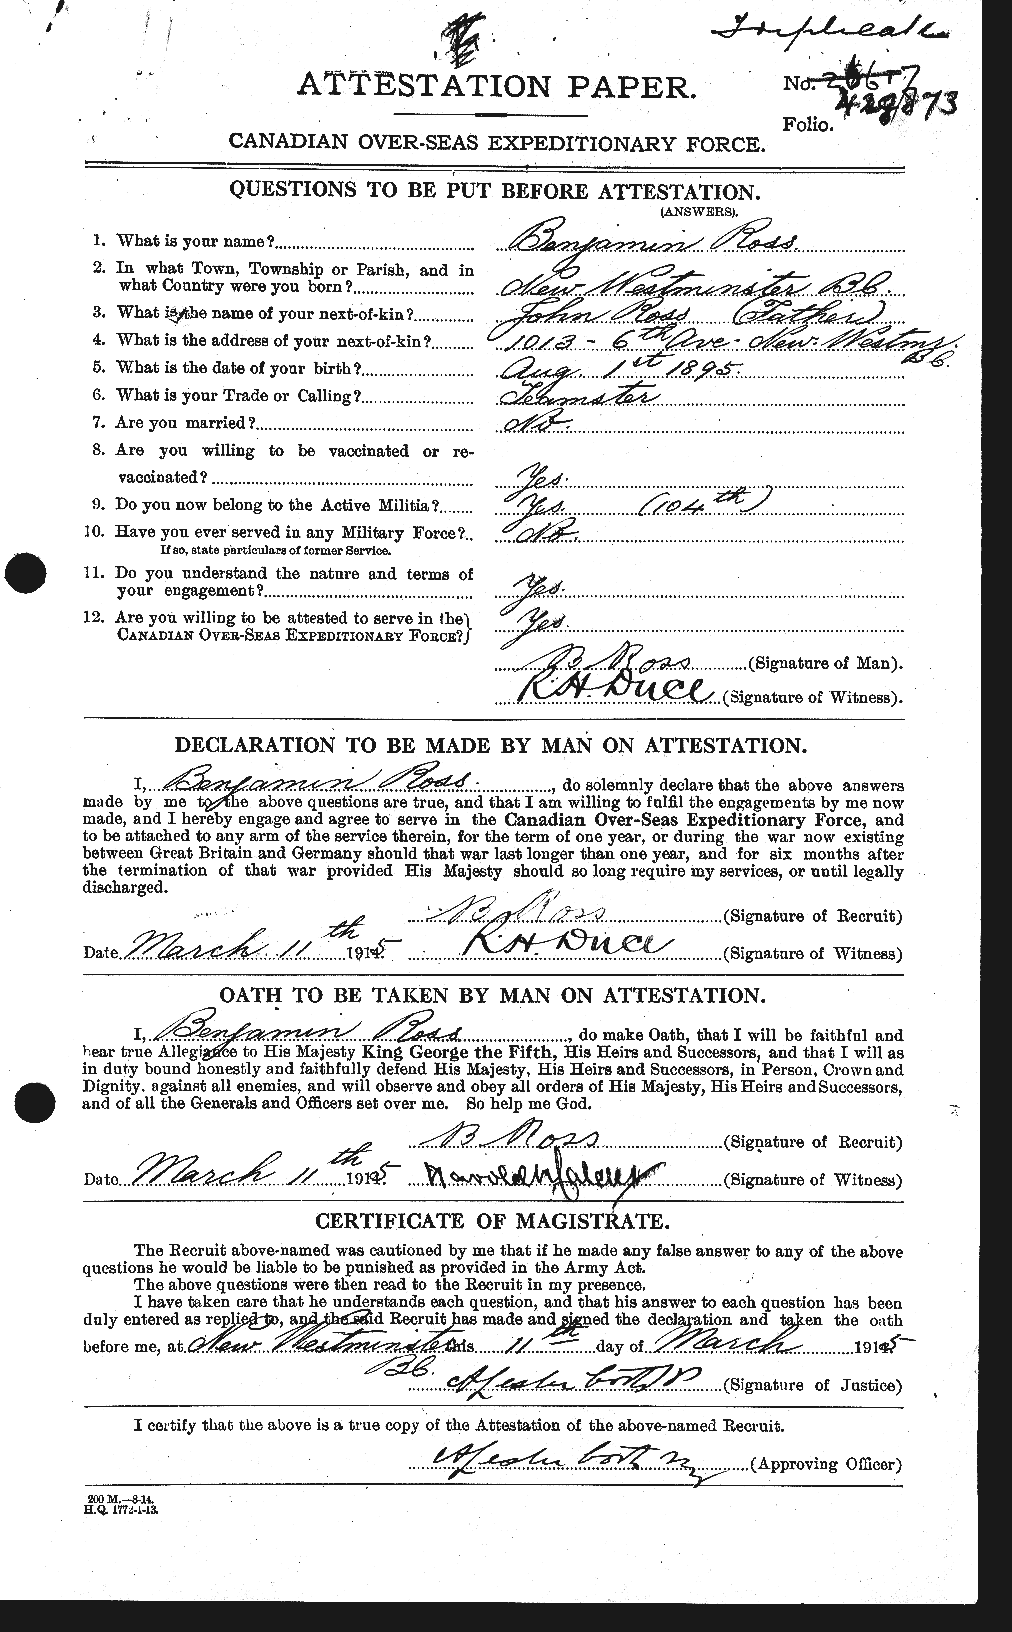 Personnel Records of the First World War - CEF 612713a